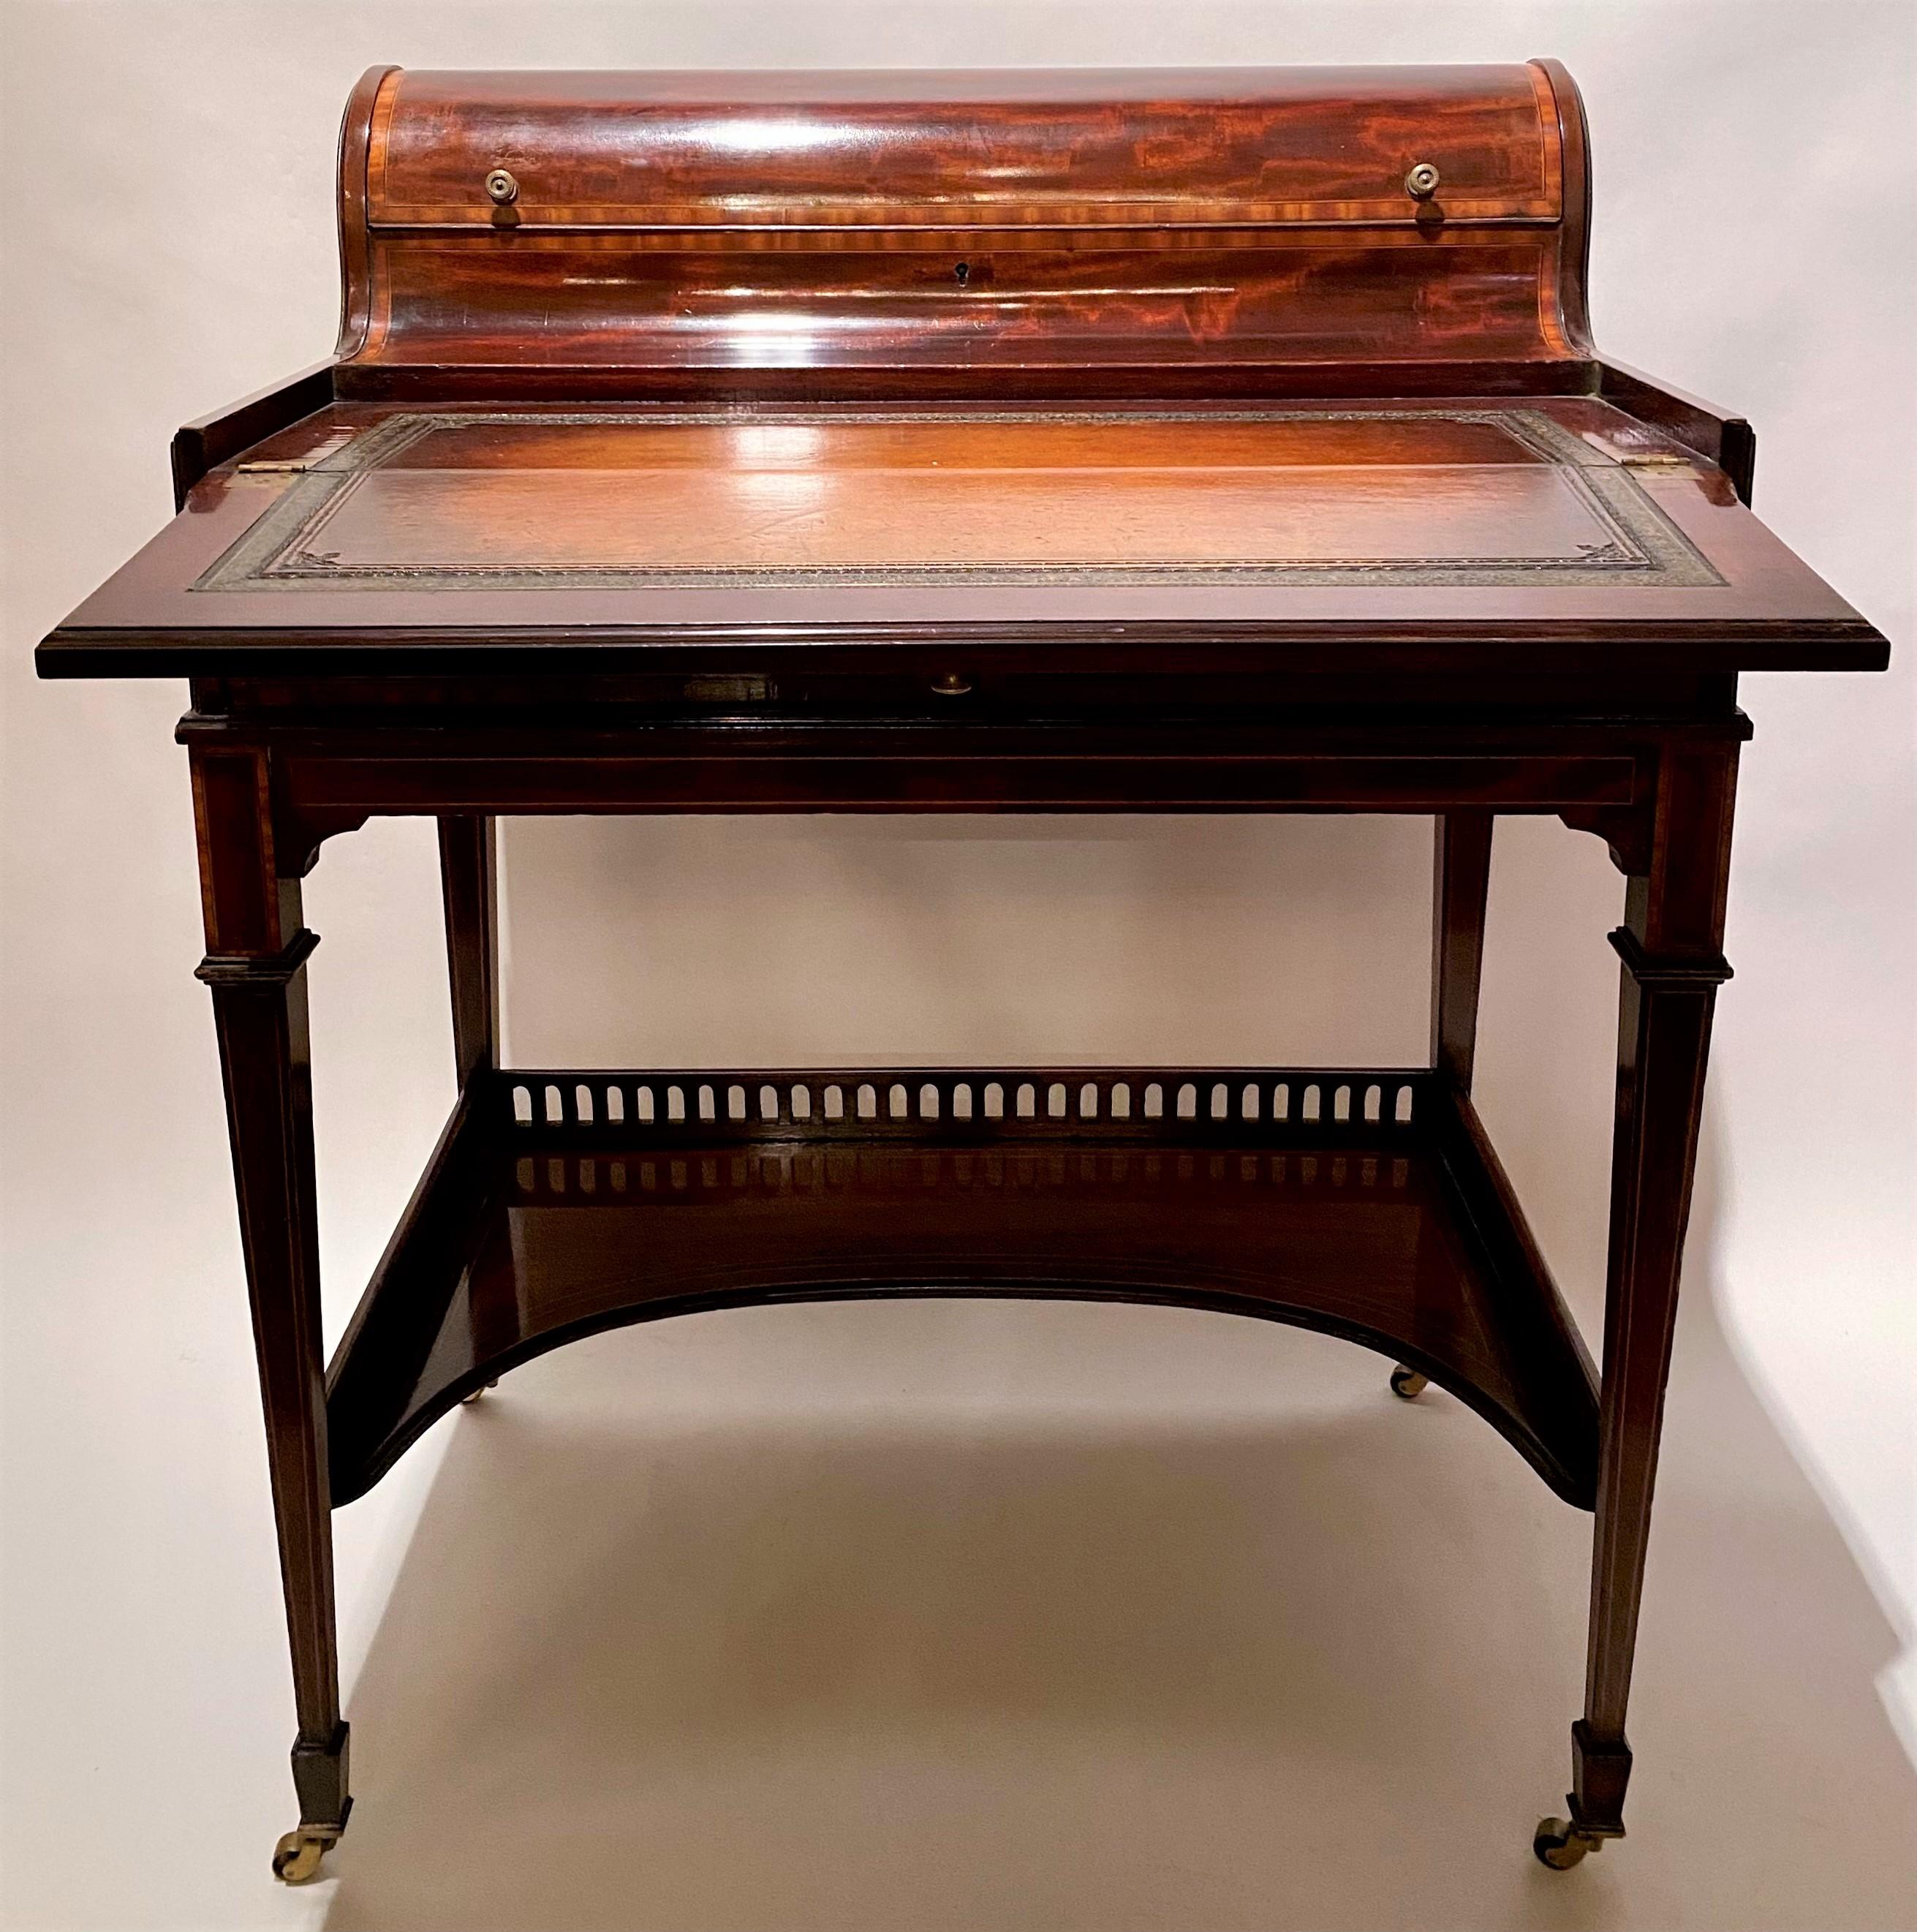 Antique English mahogany writing desk on casters, exceptional quality and design, Circa 1875-1895.